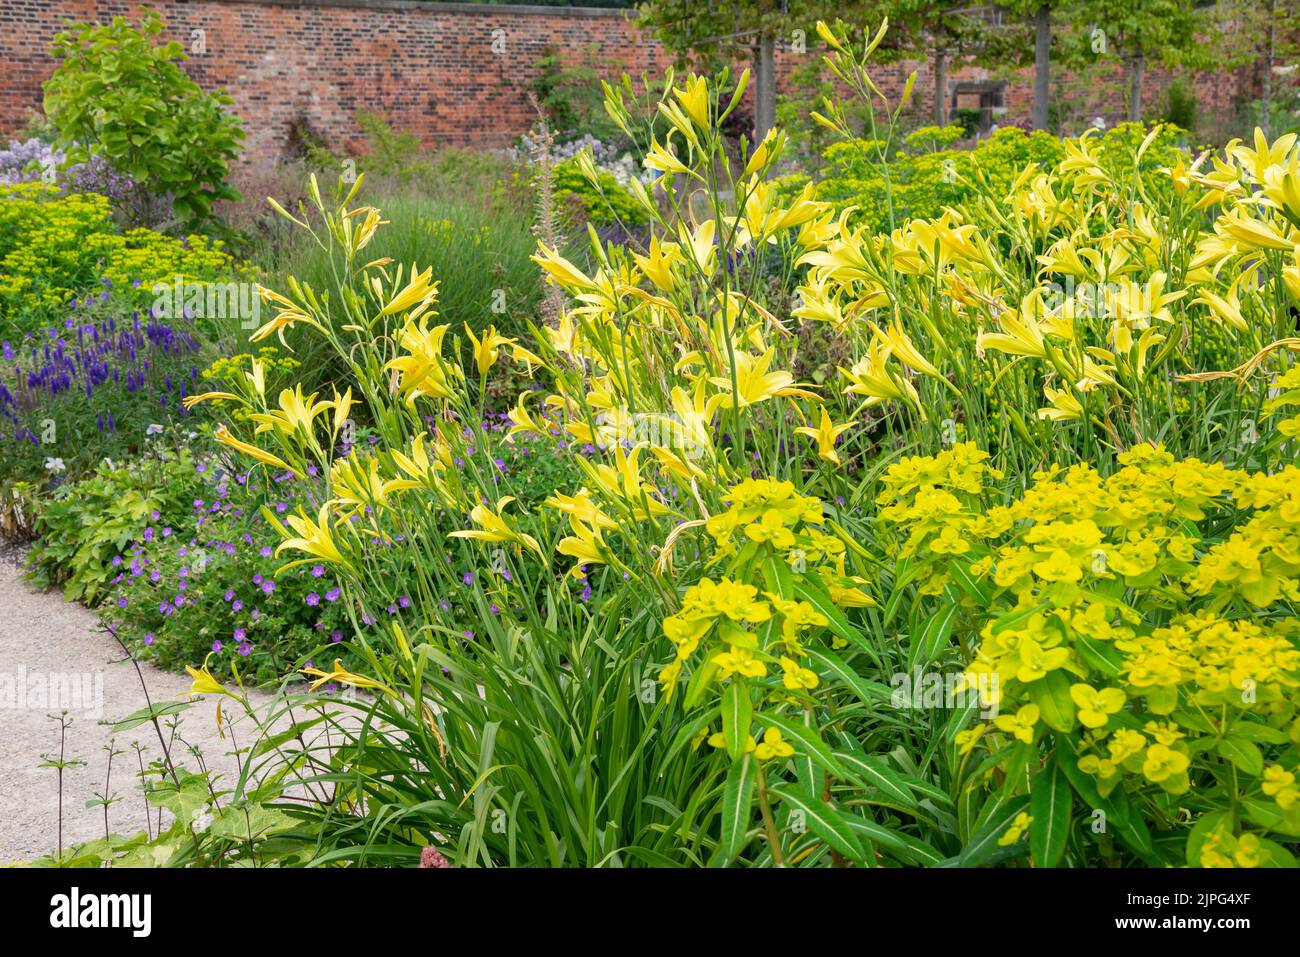 Hemerocallis Altissima a Day Lily with pale yellow flowers. Grown here beside a Euphorbia in a herbaceous border. Stock Photo